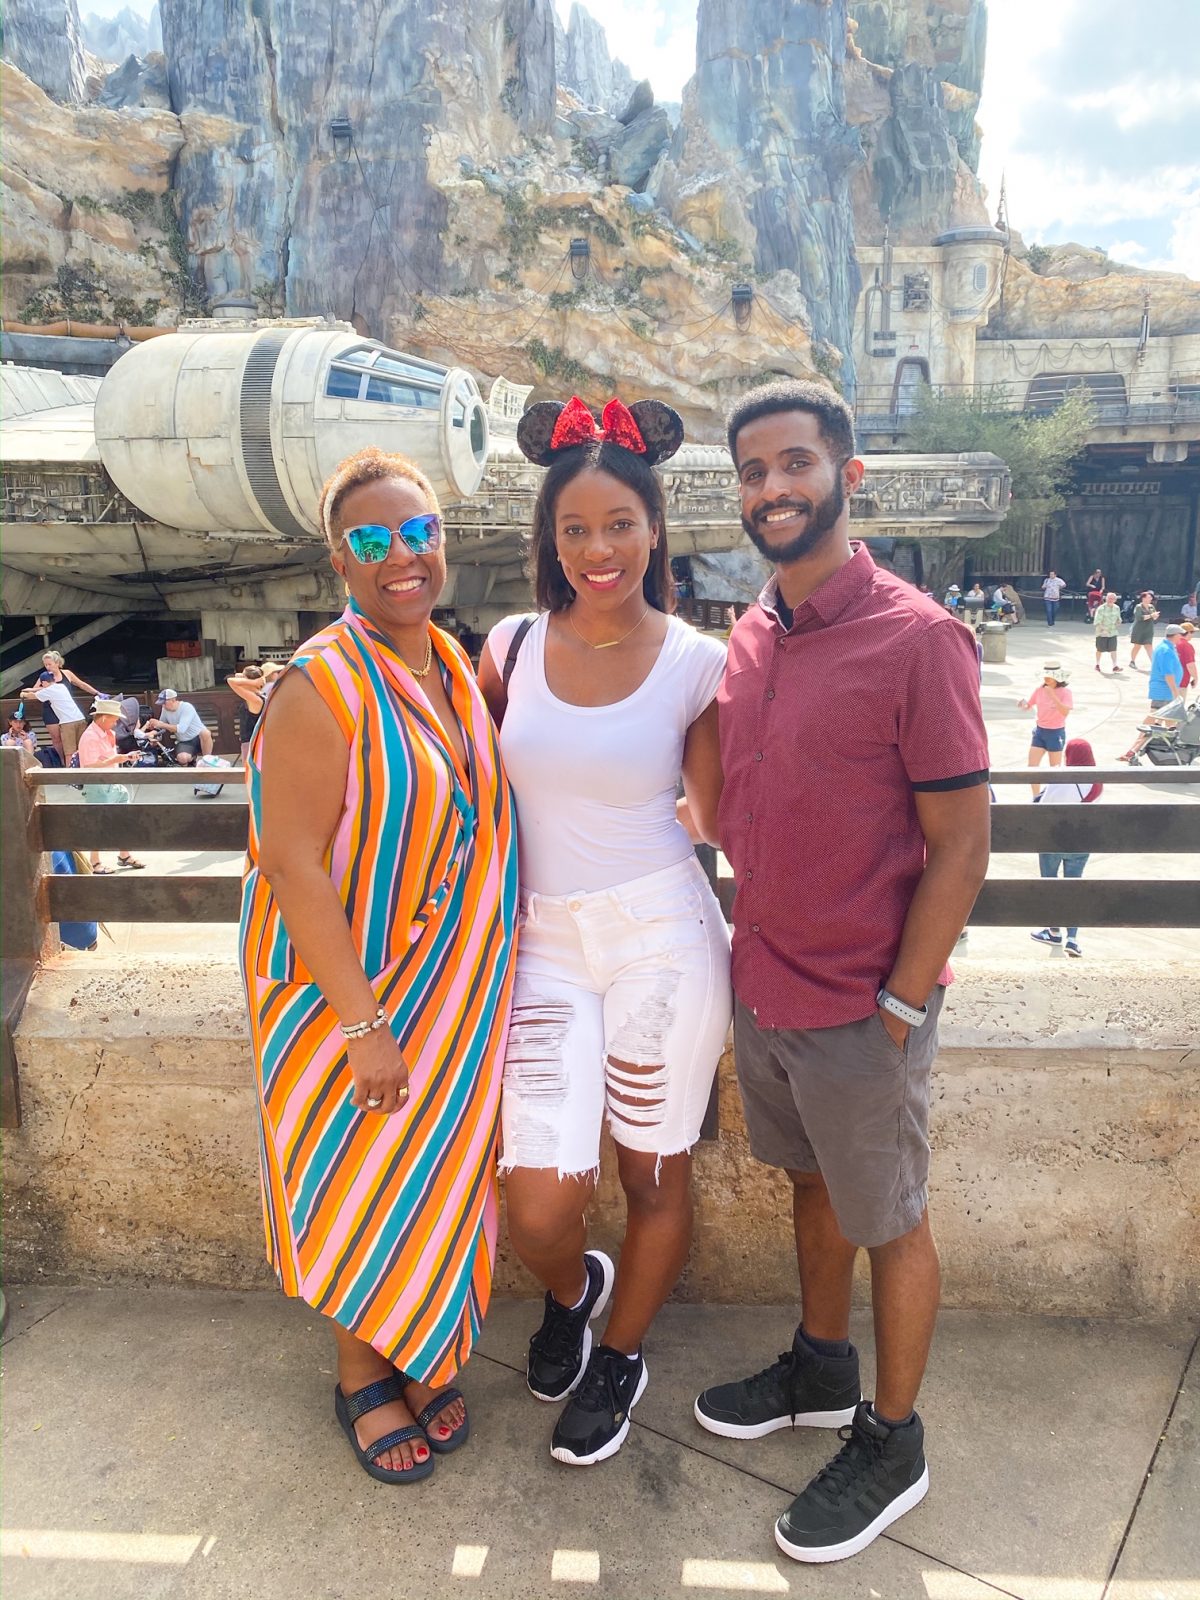 A family photo in front of Millenium Falcon: this is one of the most popular spots for Disney Memory Maker photos.